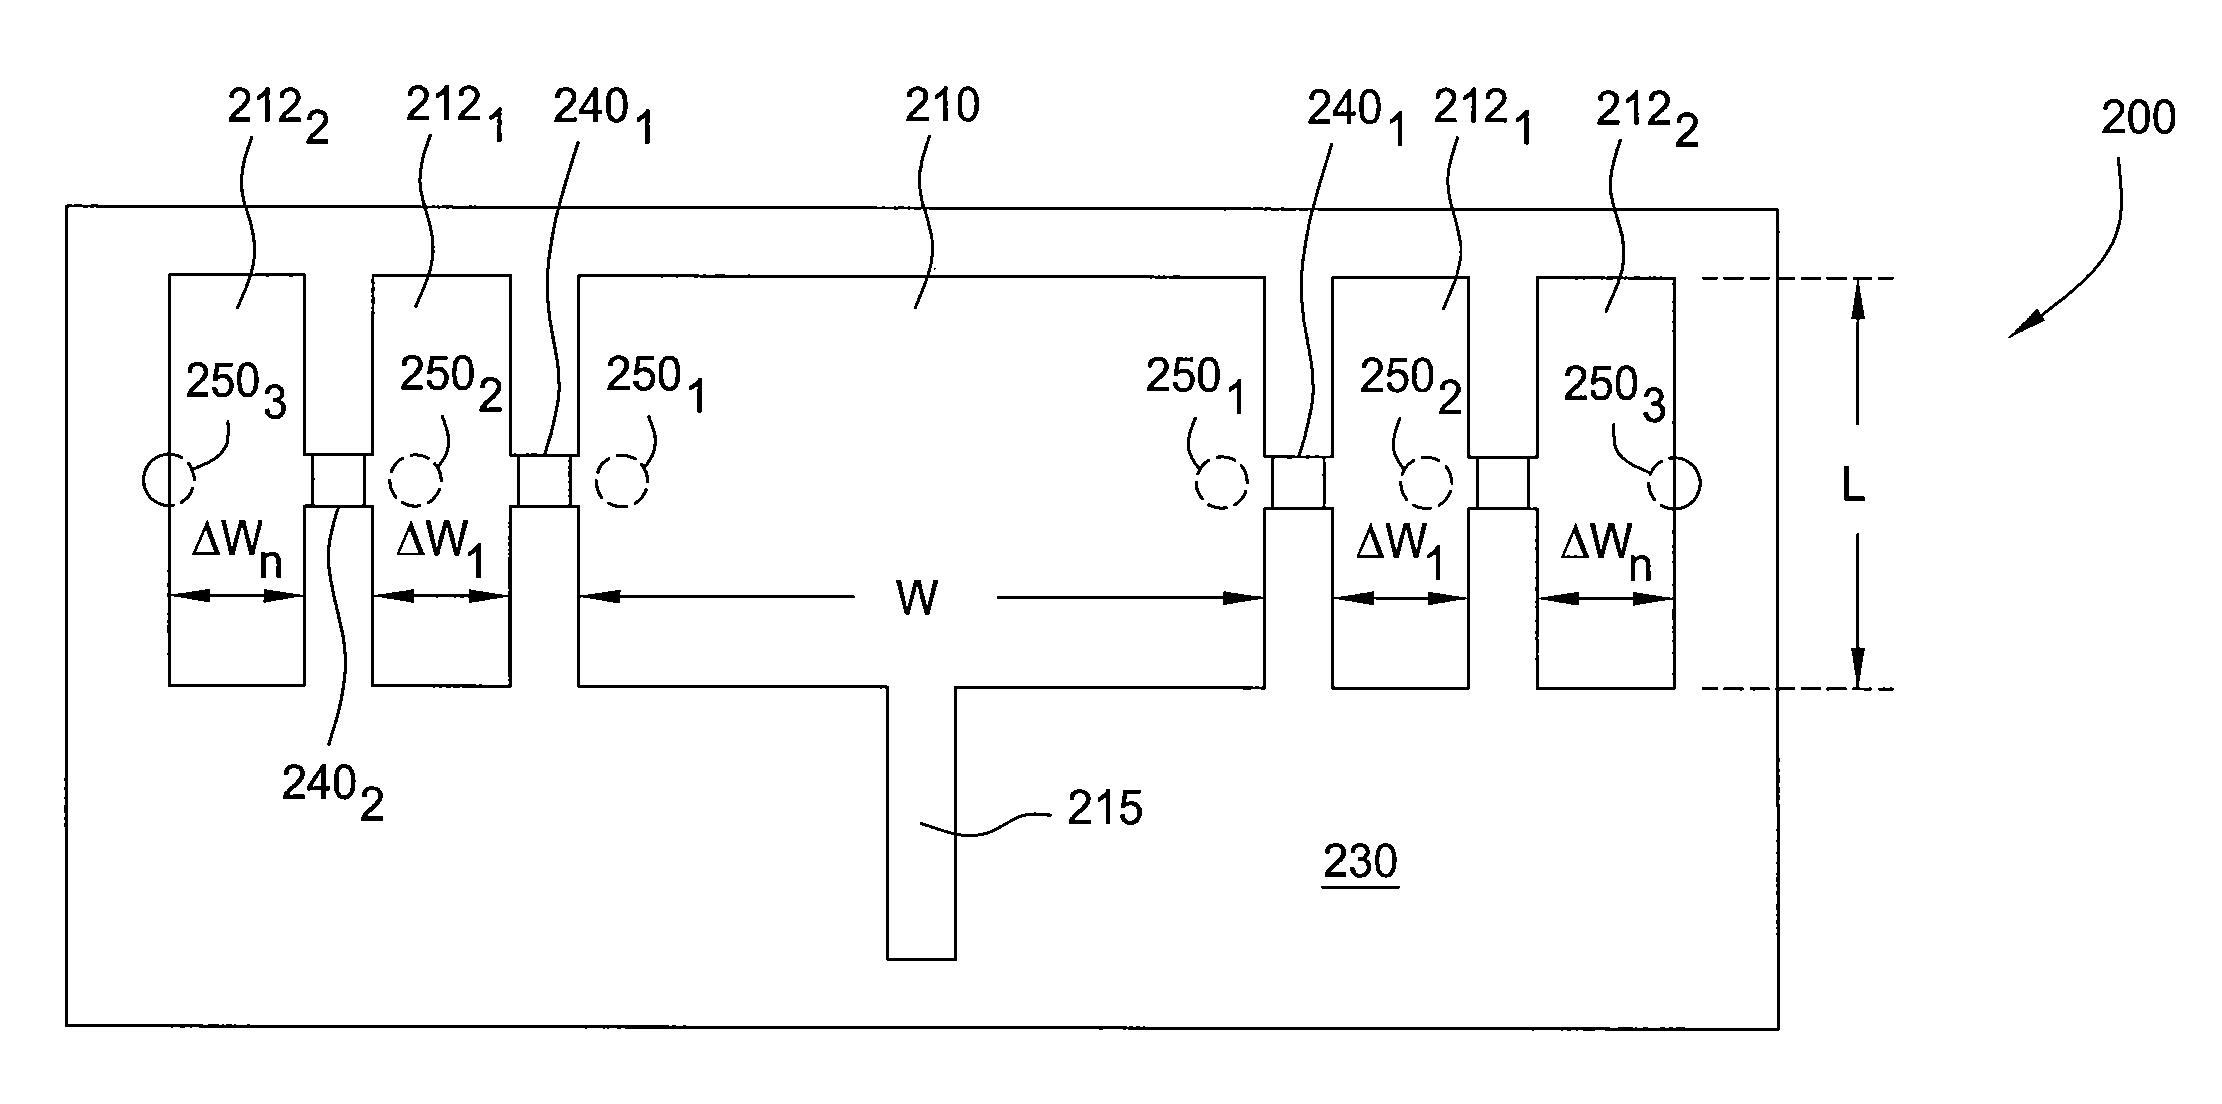 Method and apparatus for a tunable channelizing patch antenna